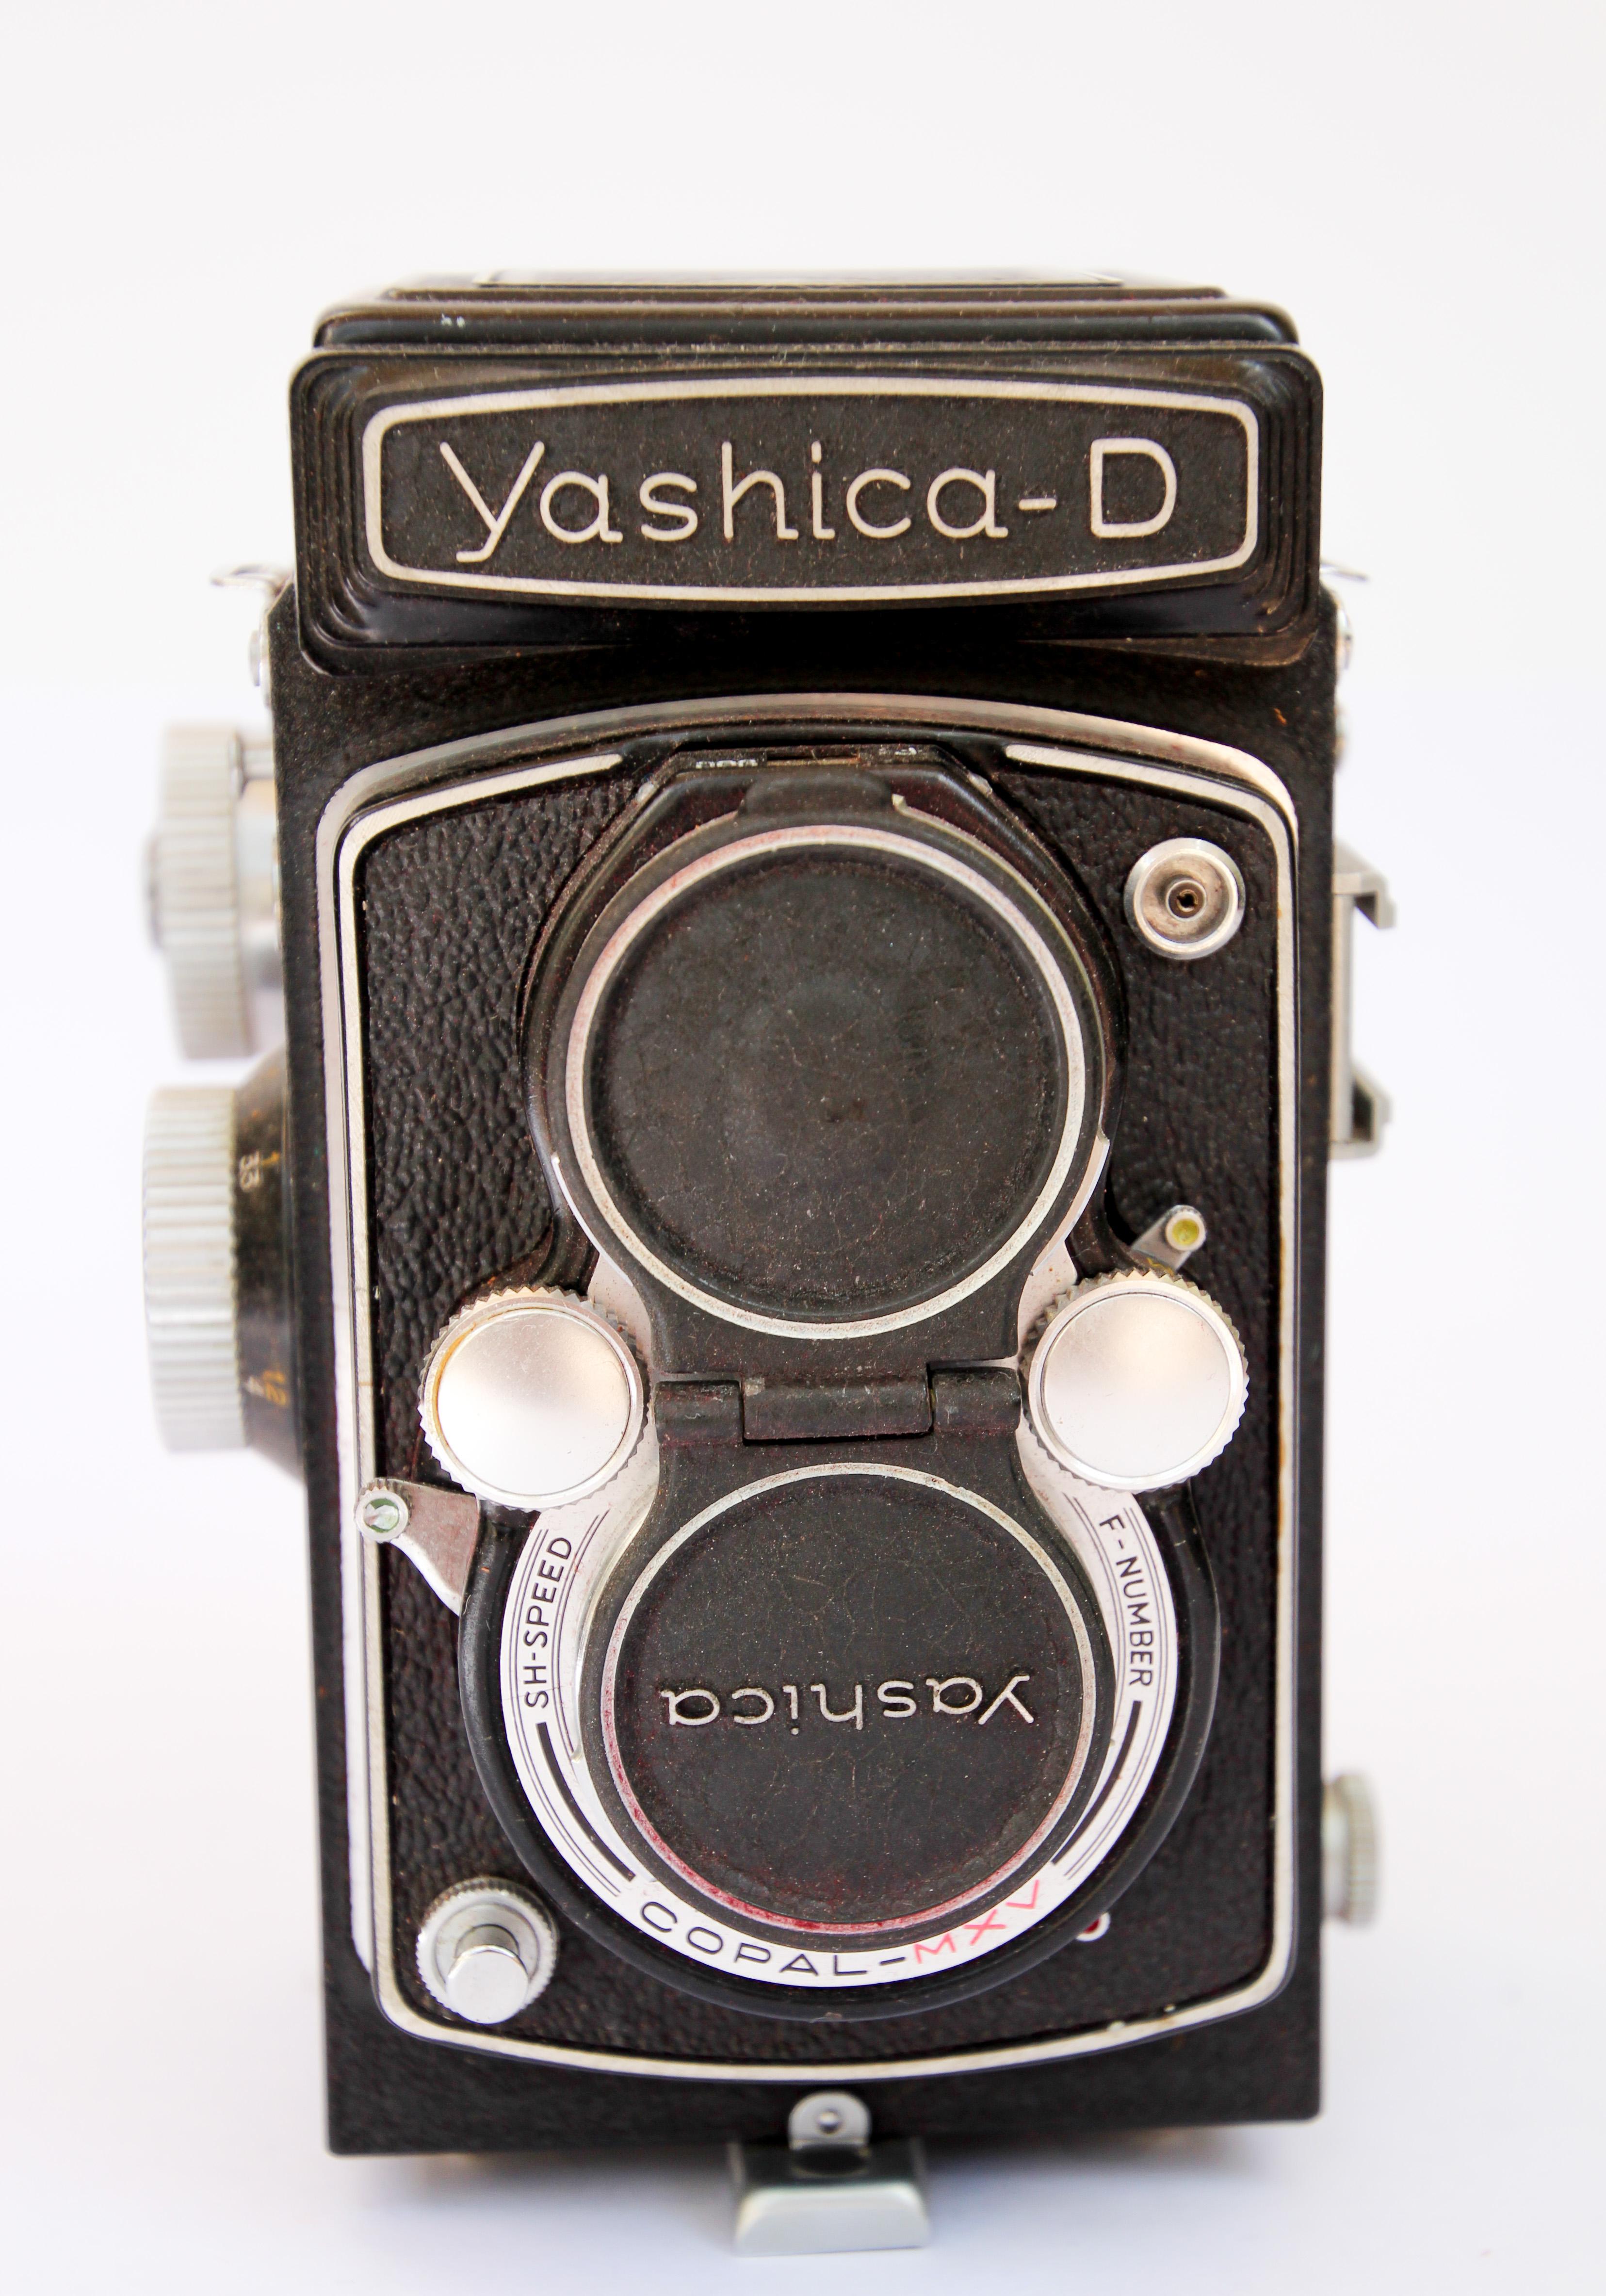 Mid-Century Modern Yashica-D Camera with Case and Accessories, circa 1958